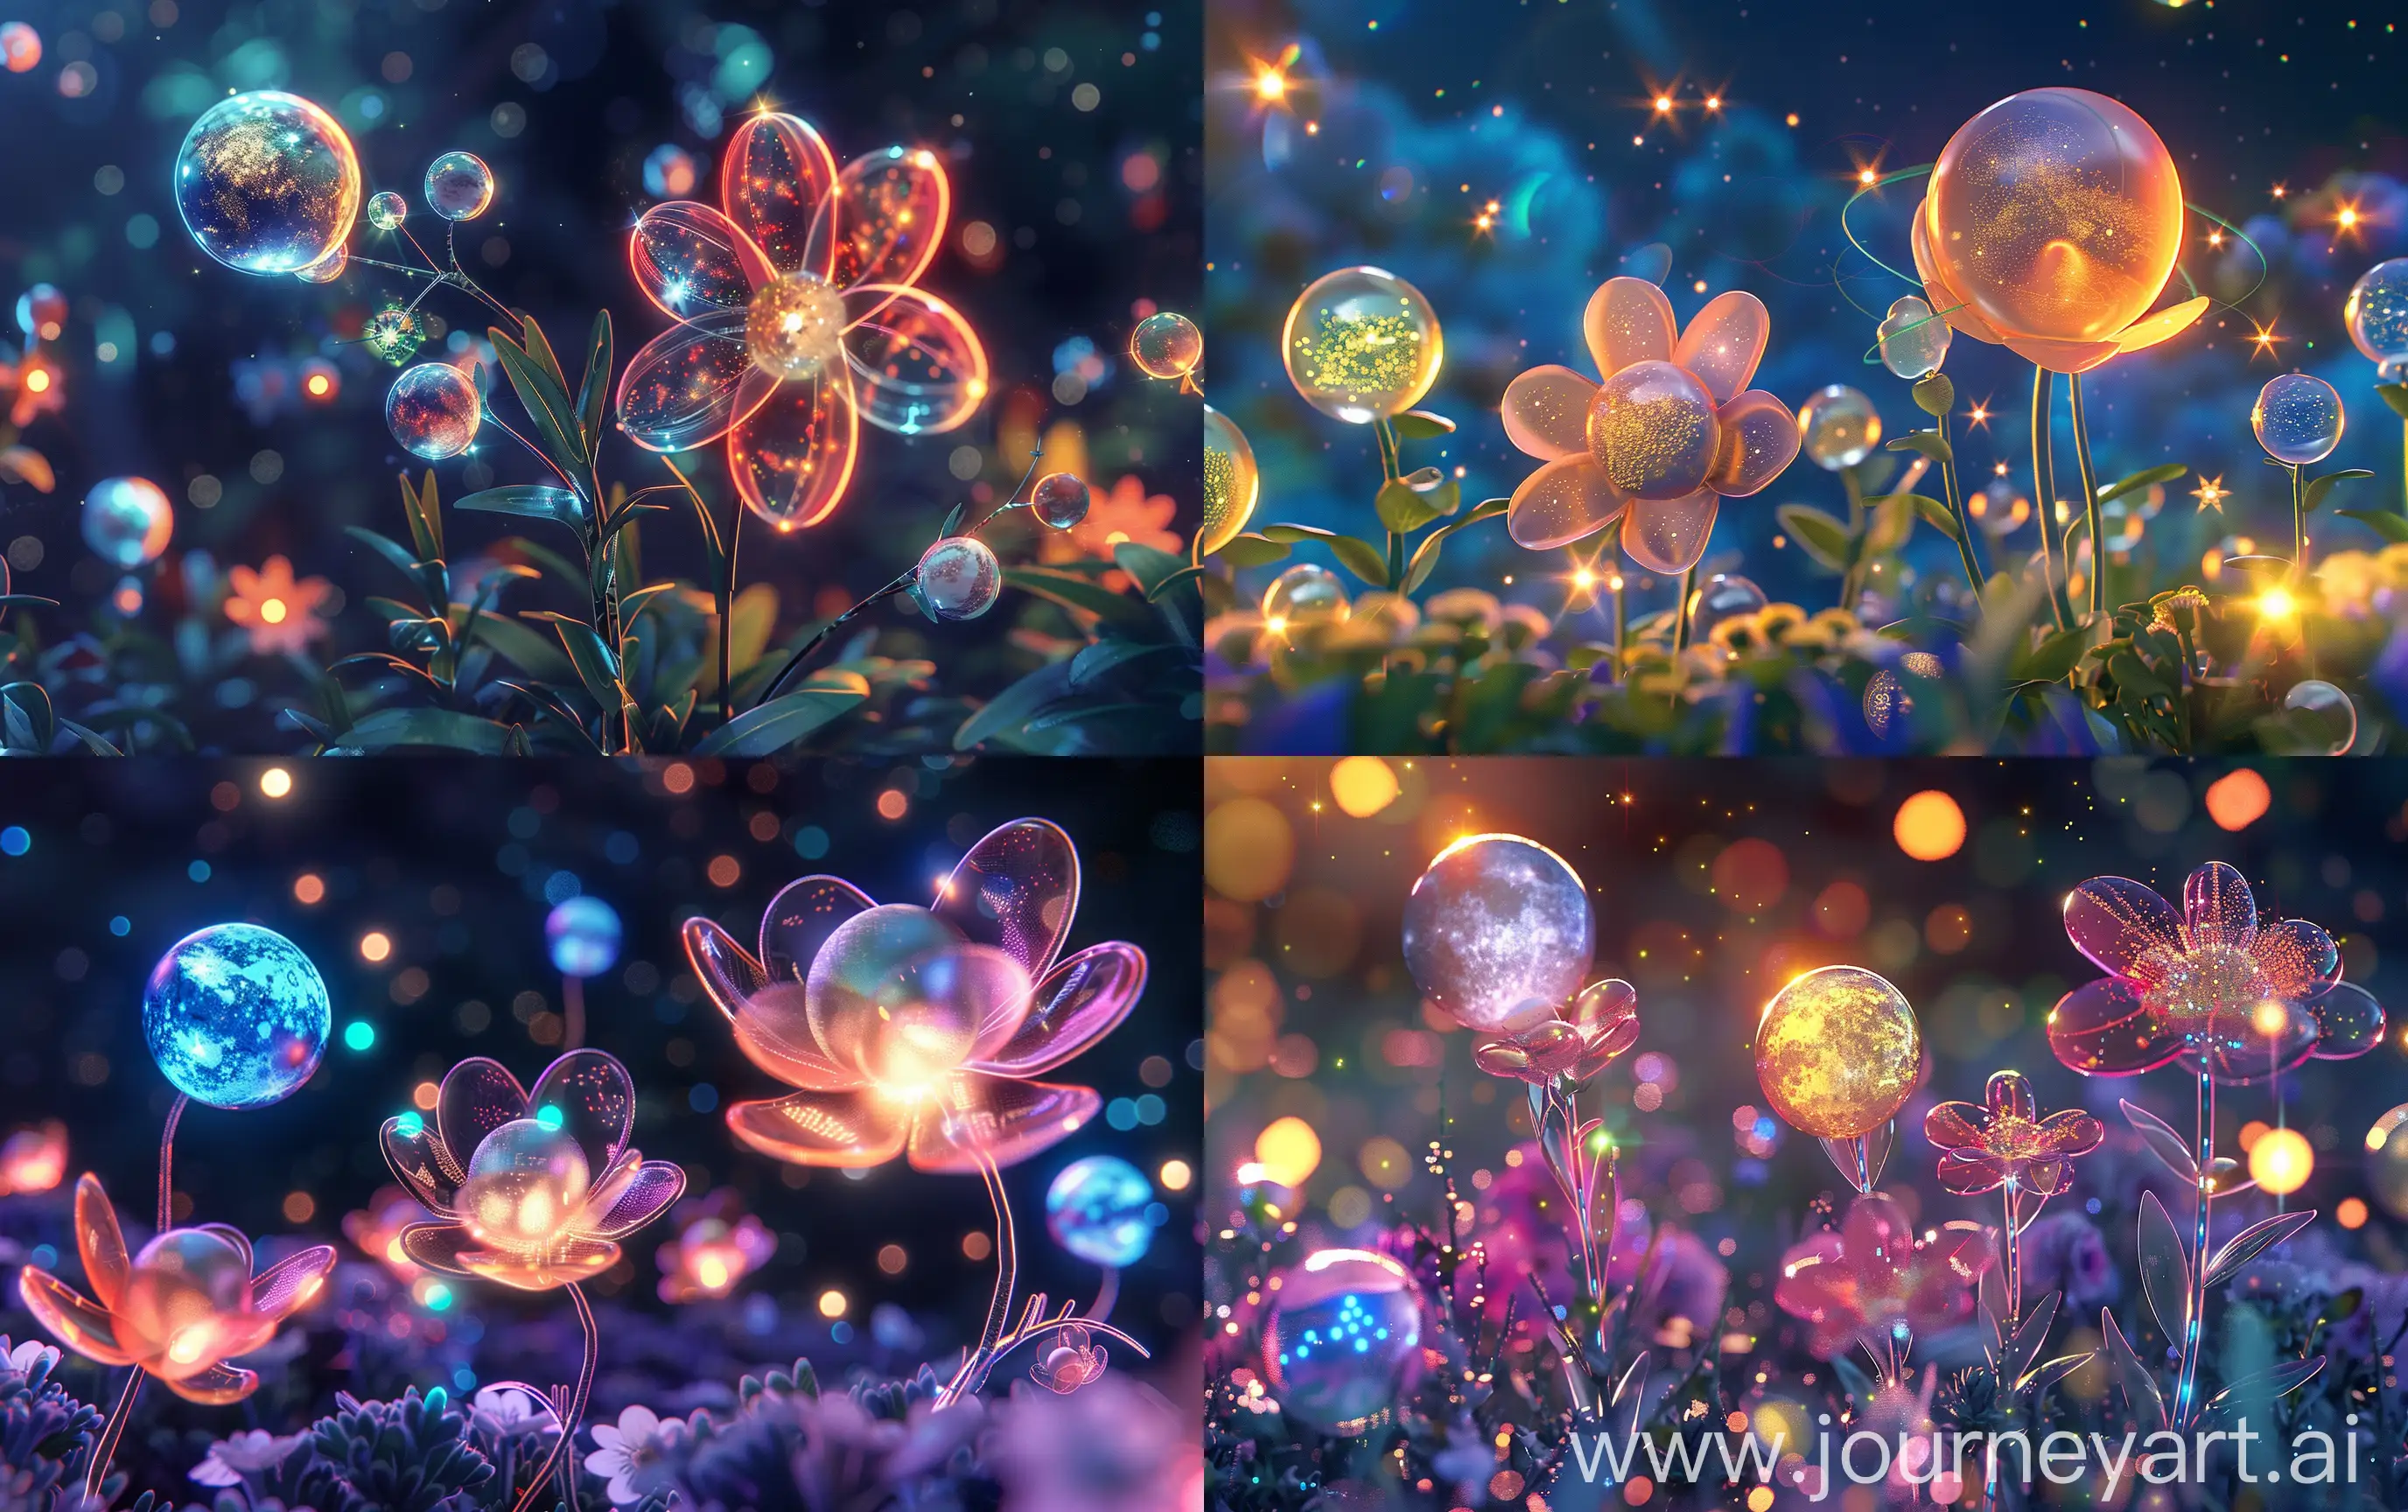 Enchanting-Celestial-Blossoms-Glowing-Planets-and-Spherical-Stars-in-a-Realistic-Display